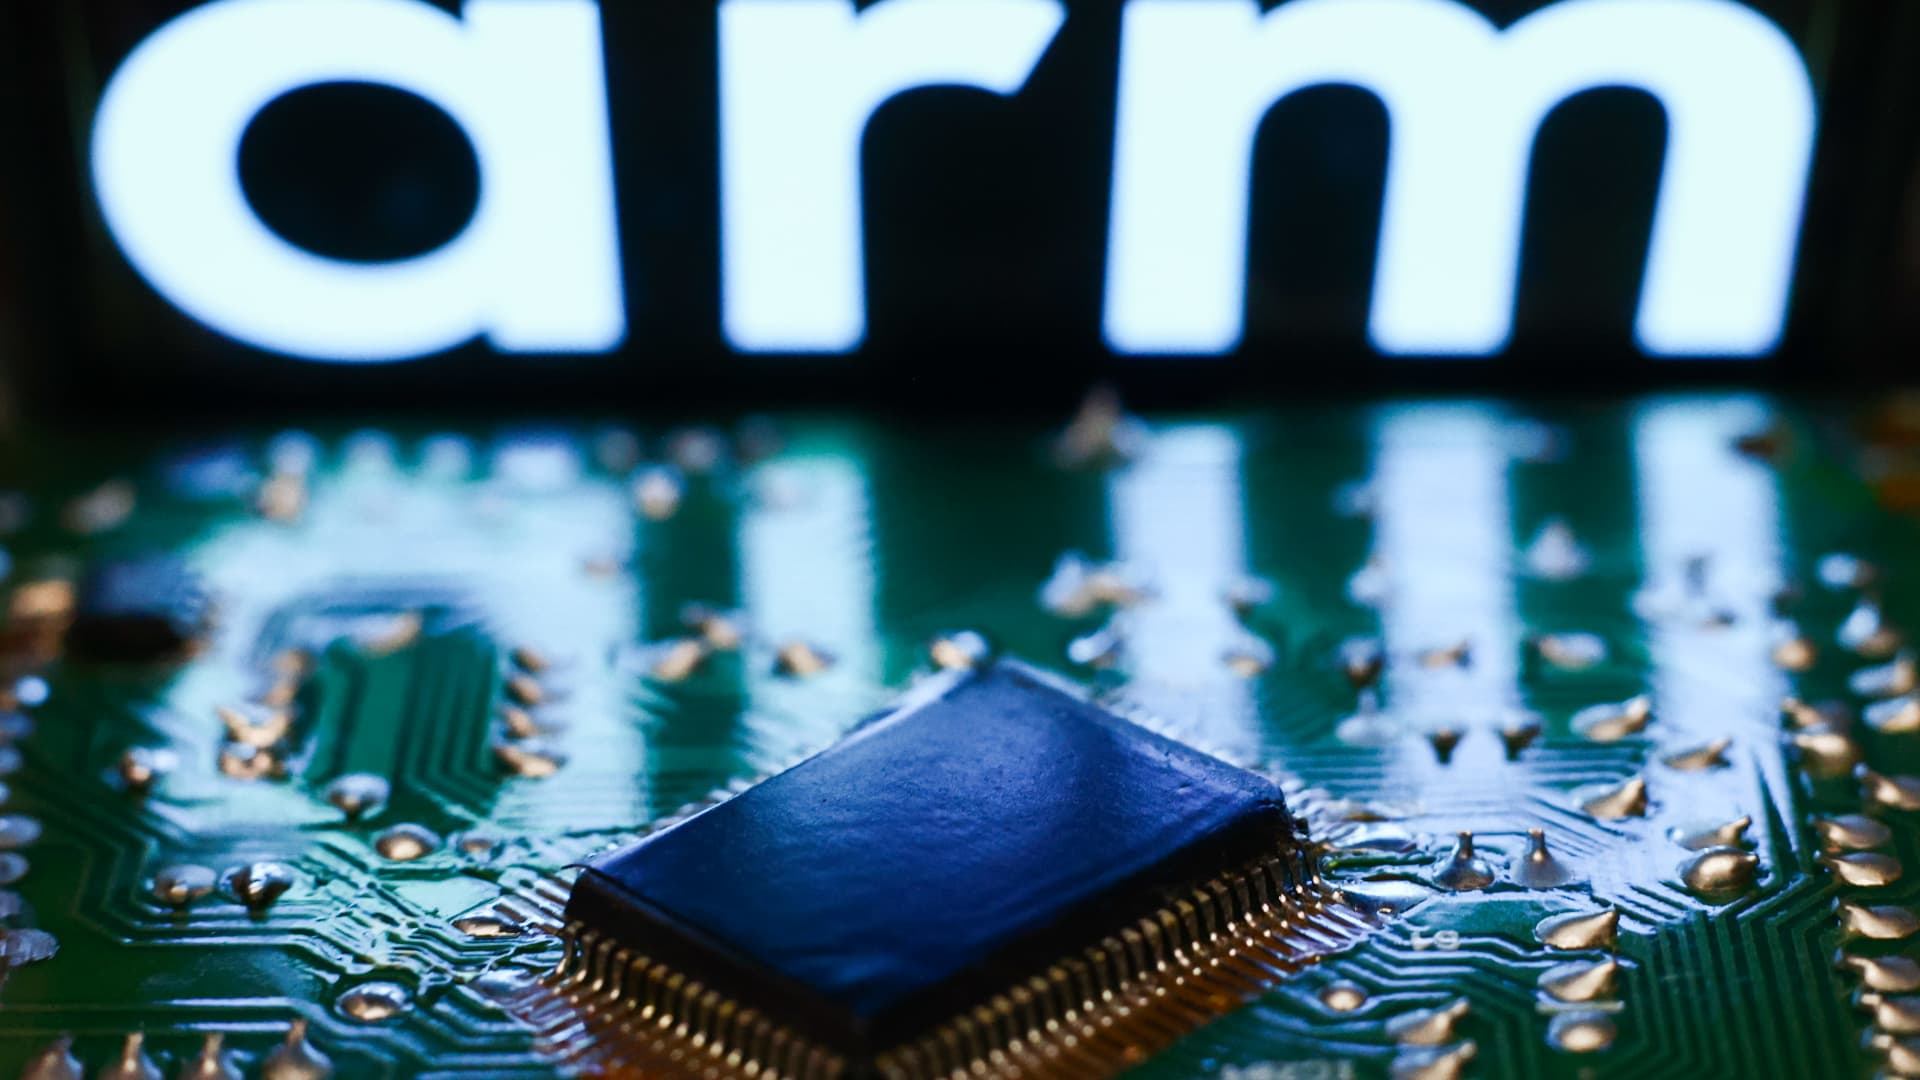 SoftBank’s Arm to reportedly start AI chips by 2025 to capture explosive need